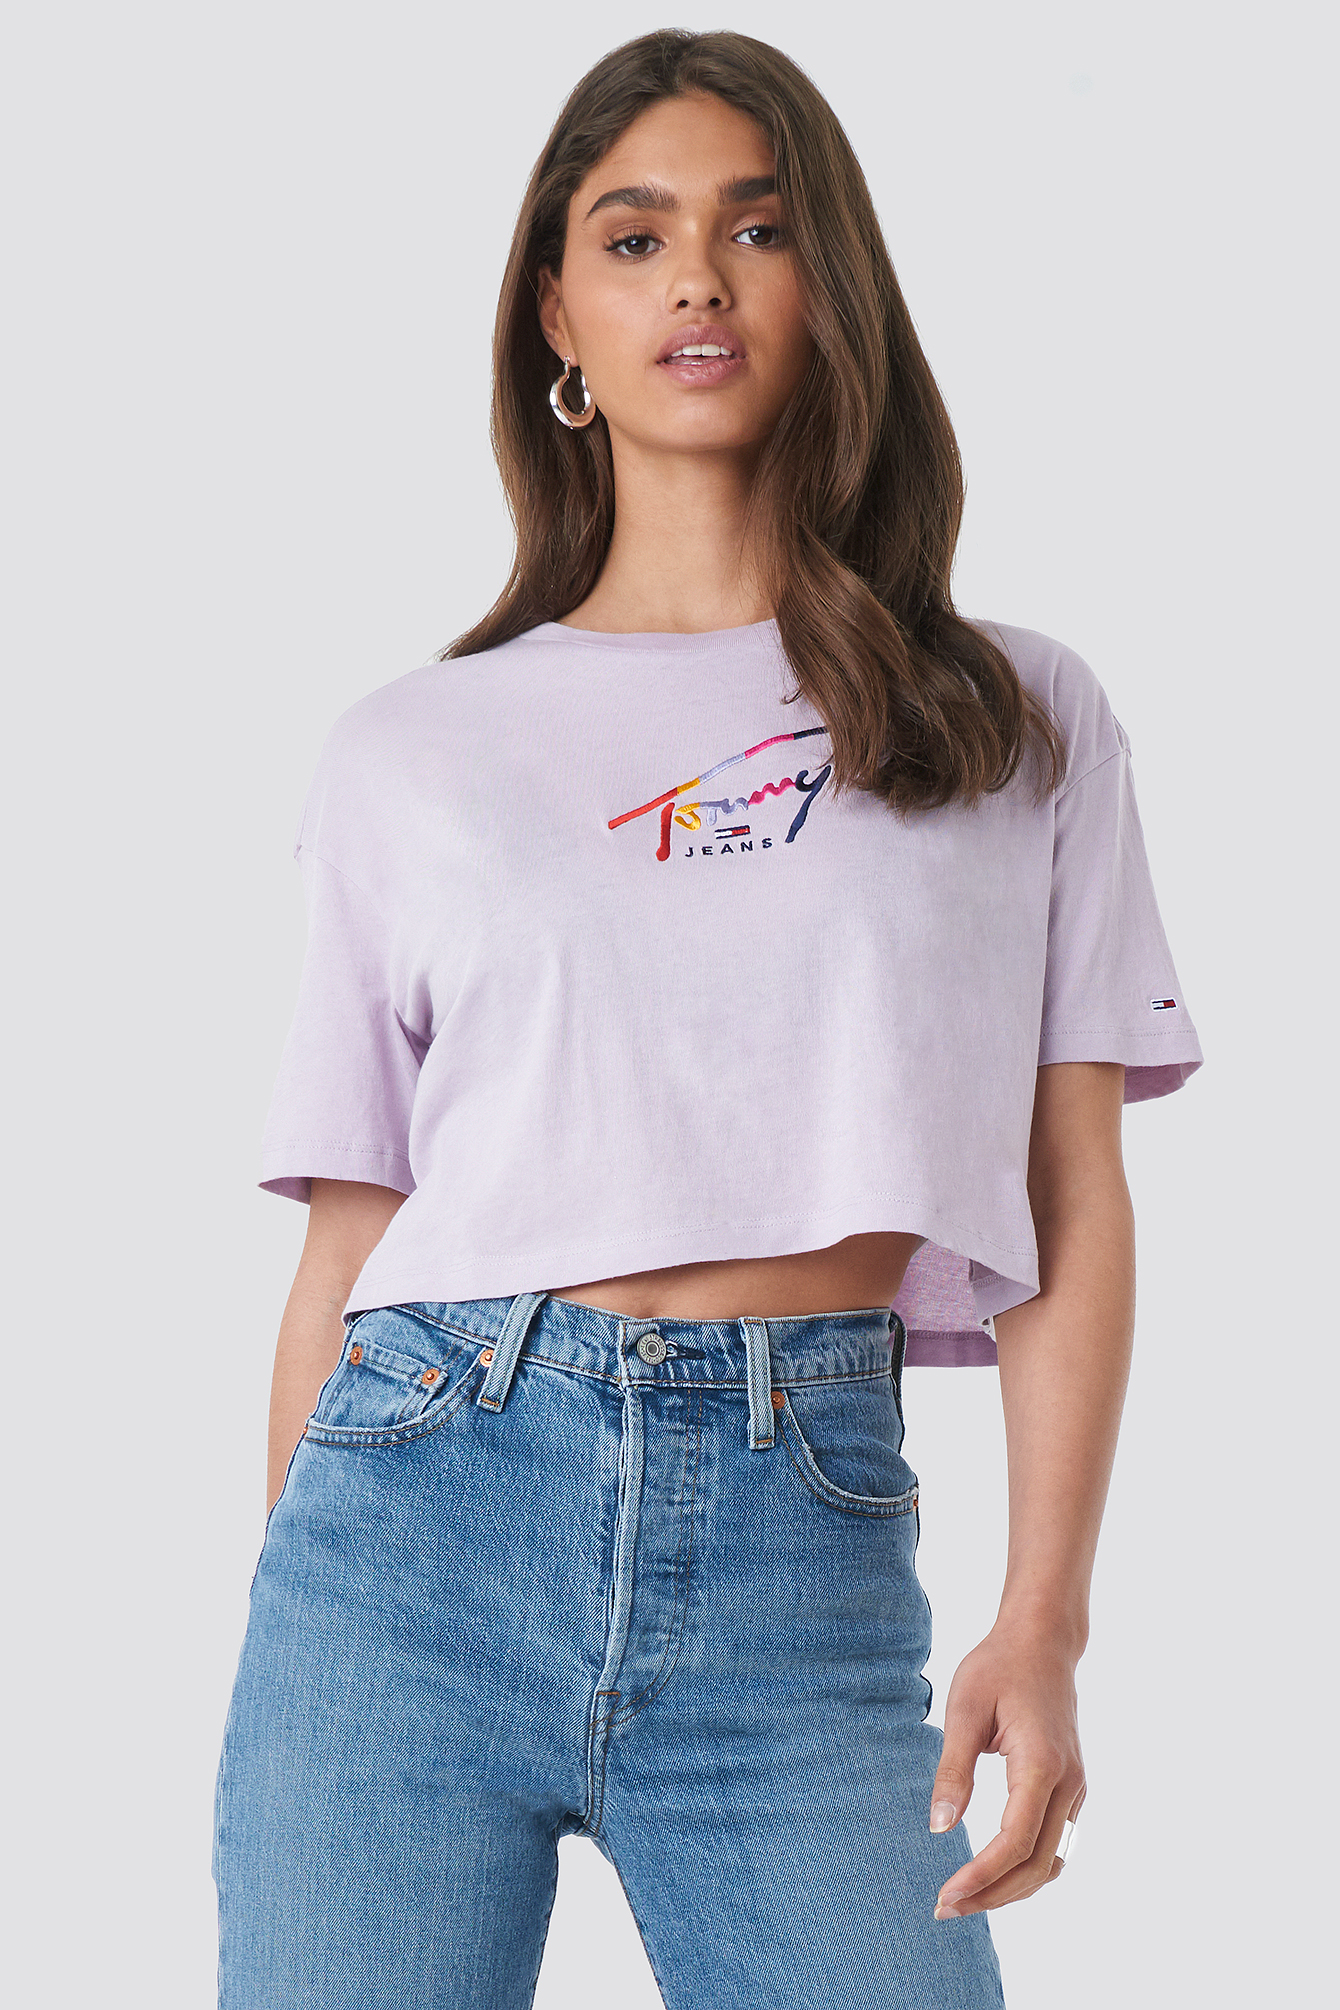 tommy jeans top